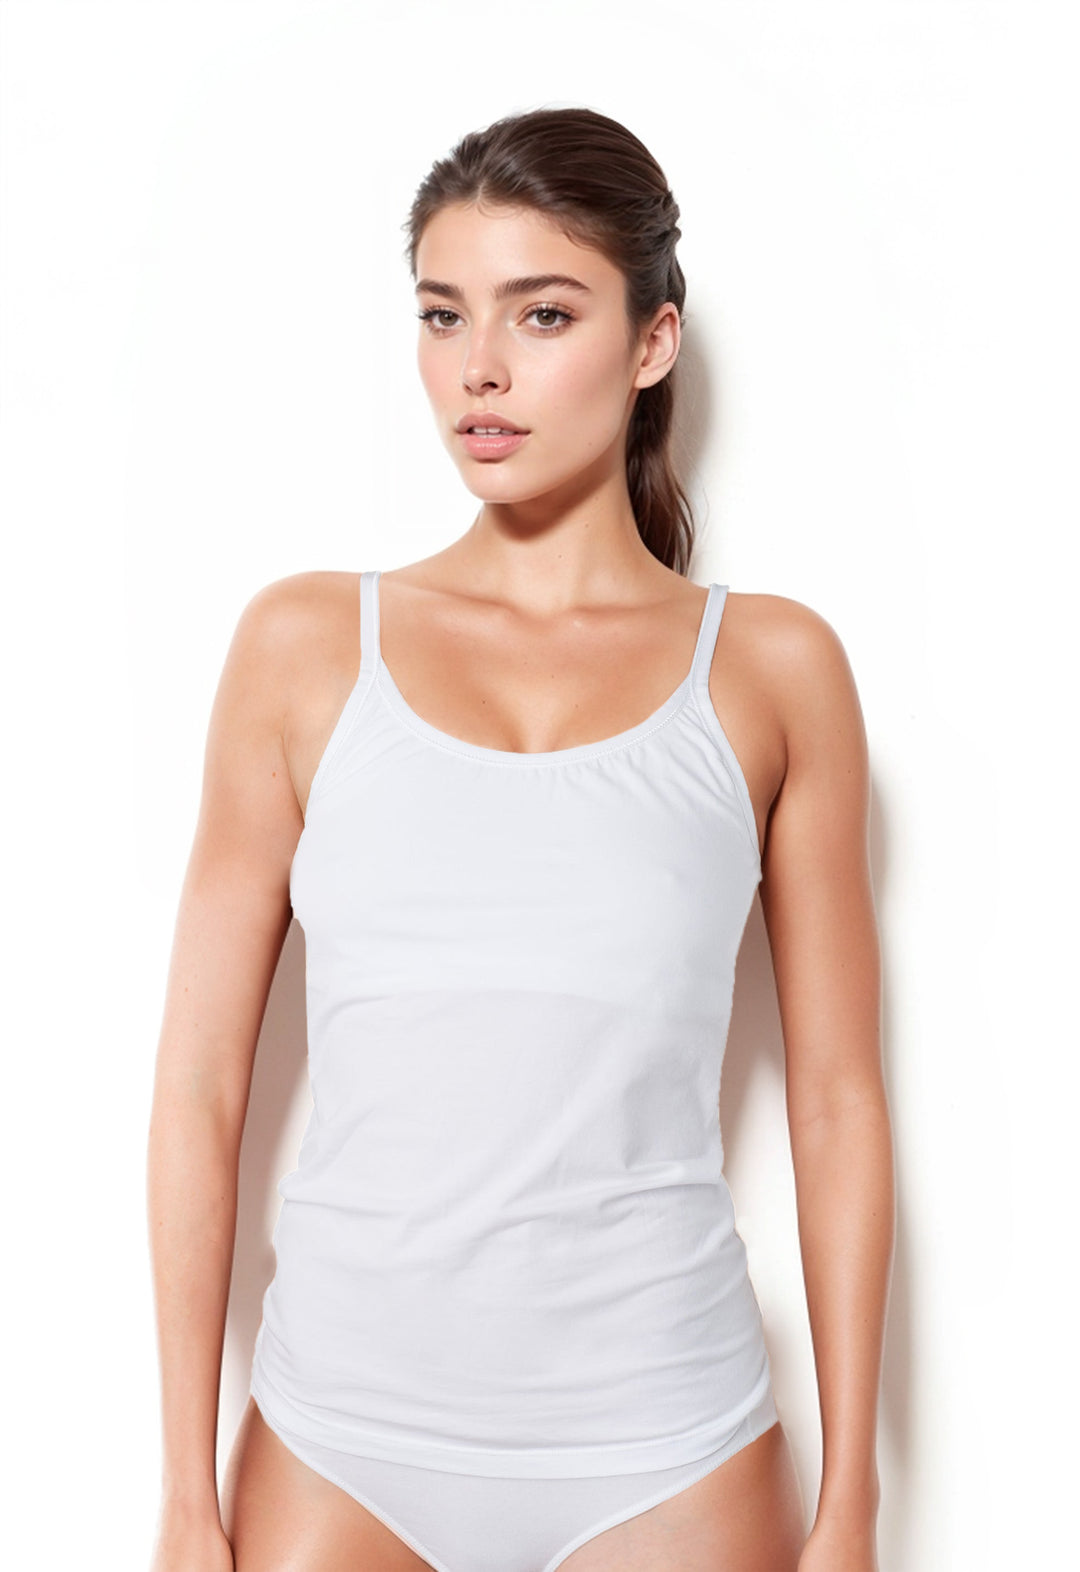 Woman's Classic Fit Camisole with Built-in Shelf Bra – Elita Intimates